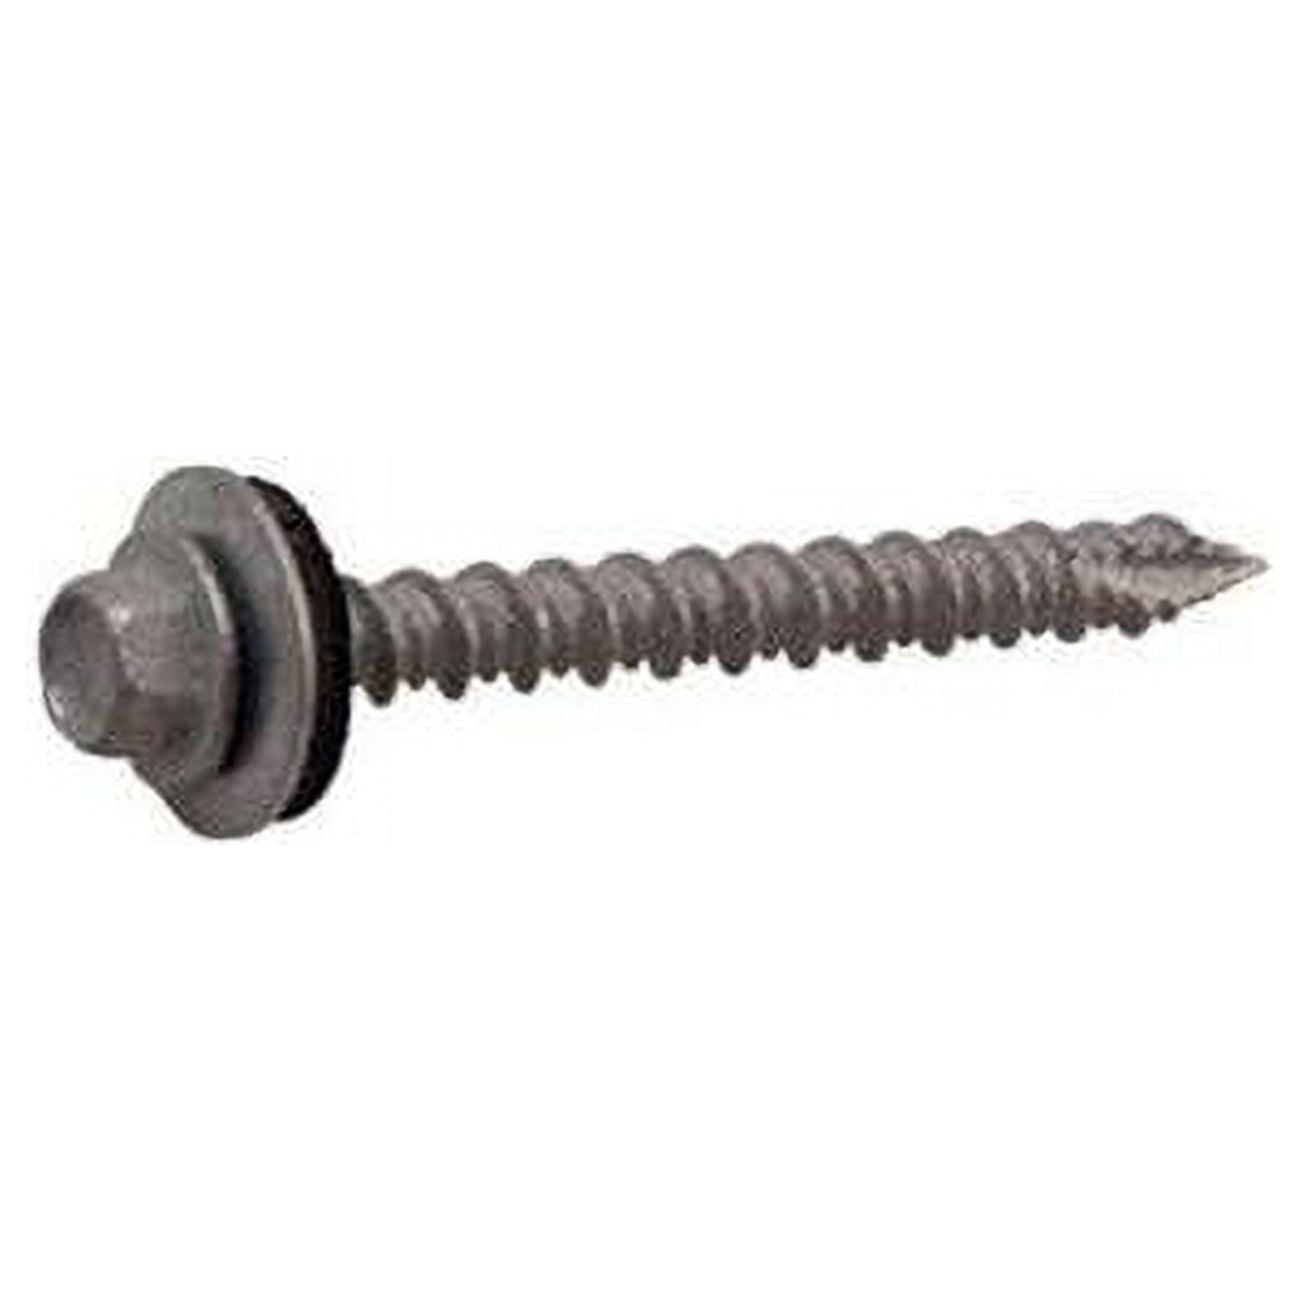 Picture of Grip-Rite 5023736 No. 10 x 2.5 in. 1 lbs Hex Washer Head Washer Roofing Screws - Pack of 12